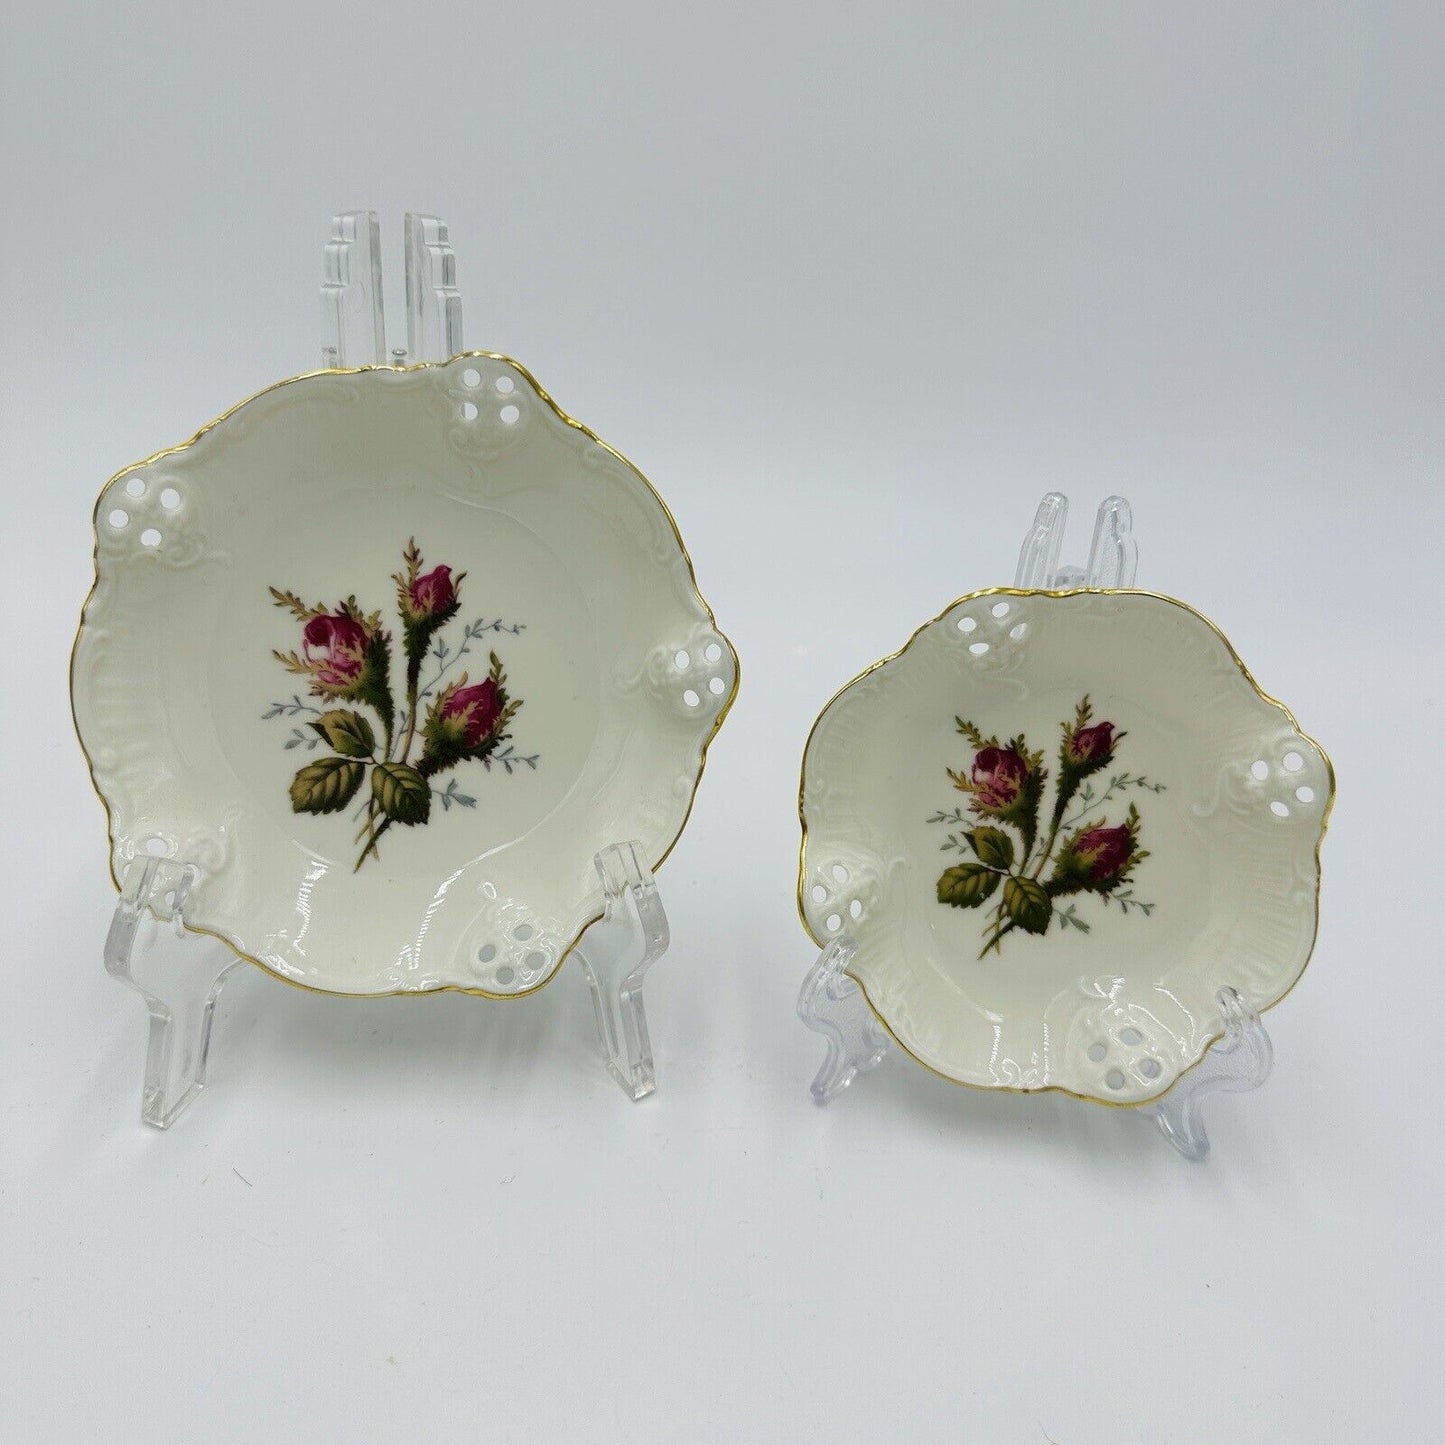 Rosenthal Moliere Moss Rose 4" Pierced Porcelain candy dishes floral